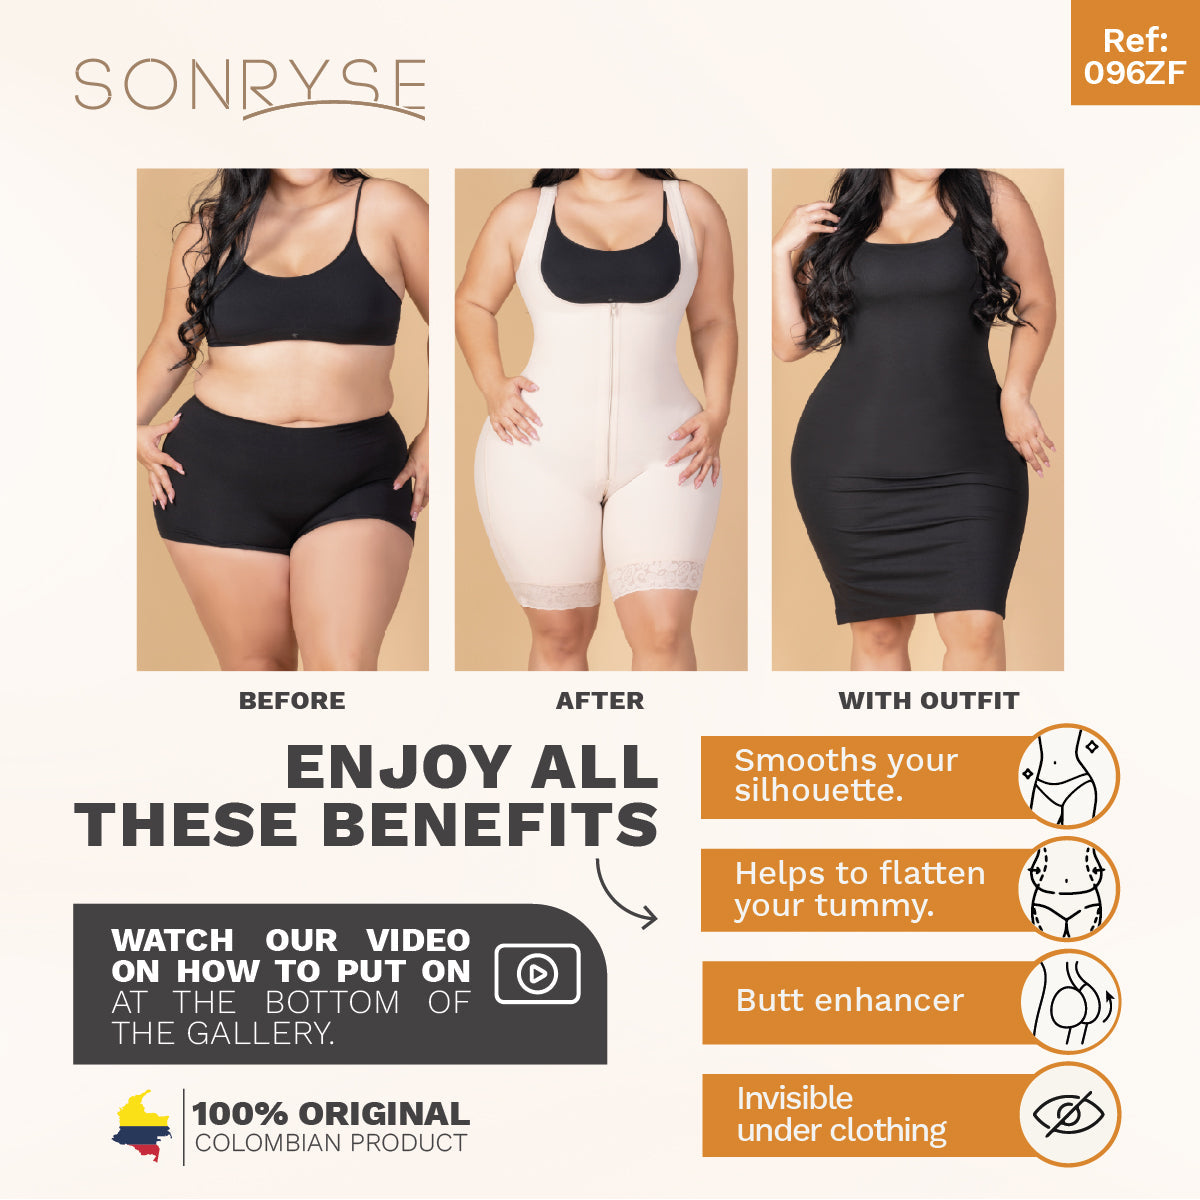 SONRYSE 096ZF Everyday and Postpartum Use | Powernet